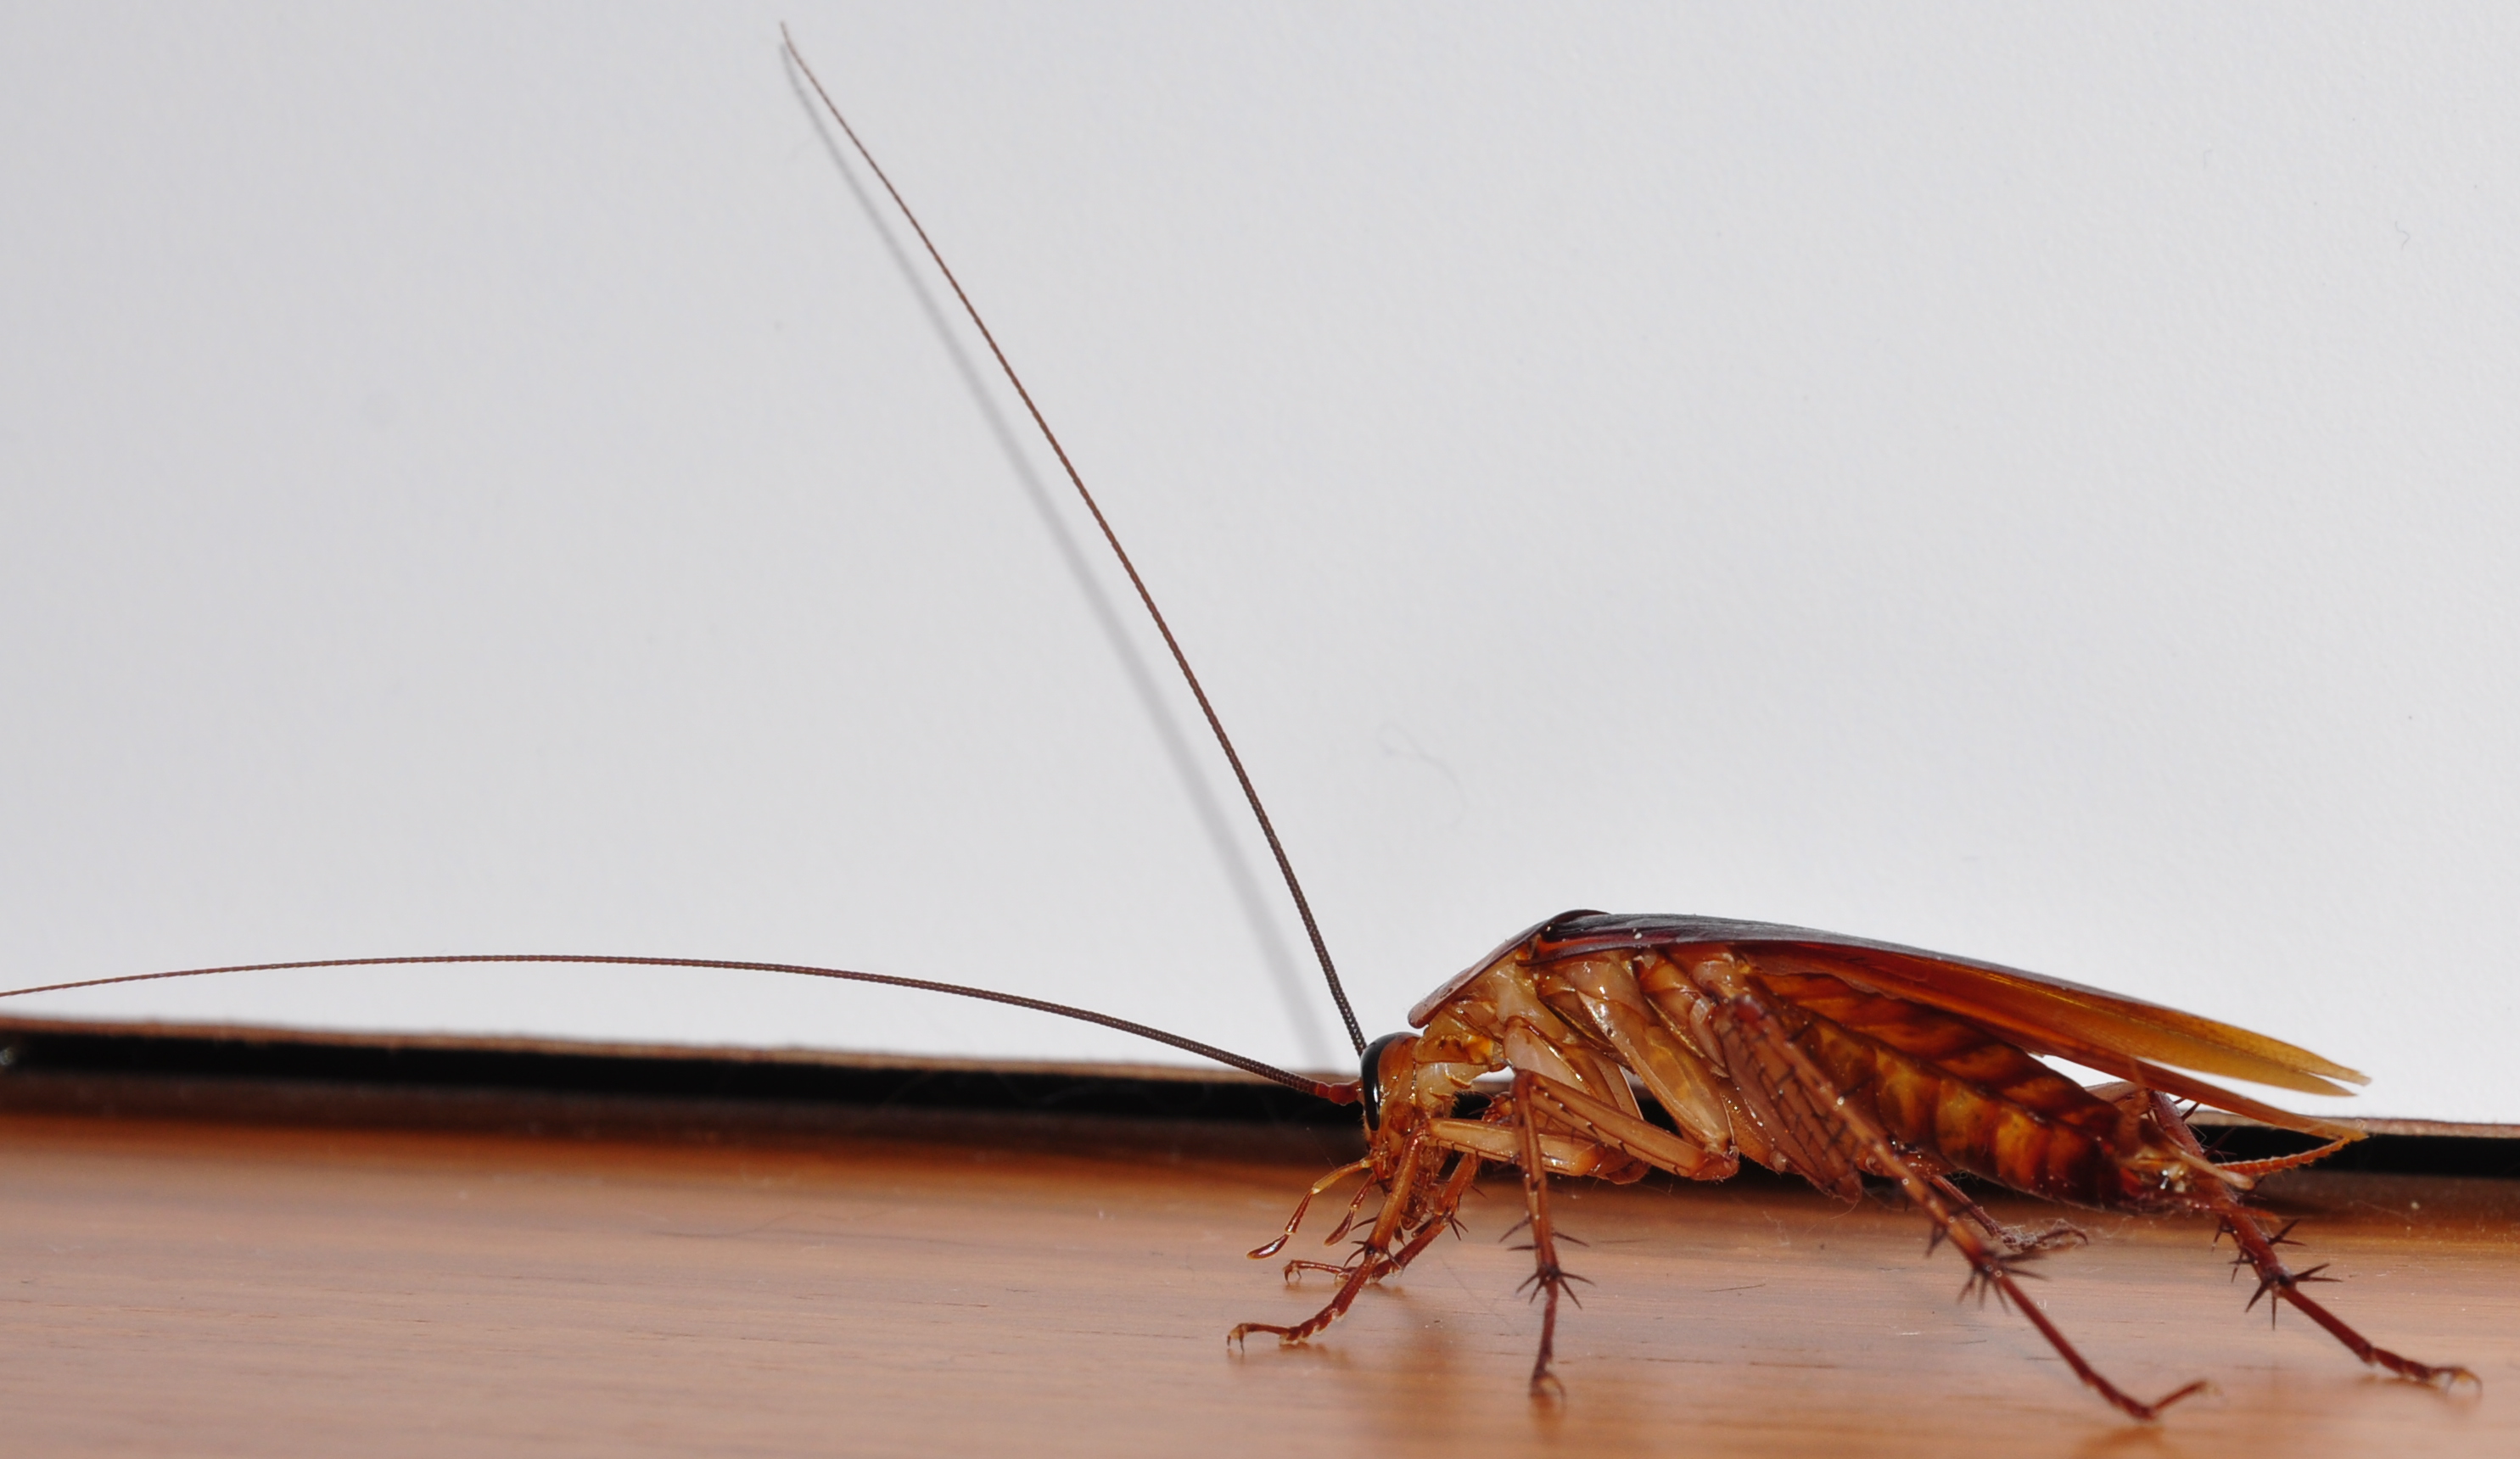 Cockroaches: How to Prevent a Winter Roach Infestation | Any Pest Inc.